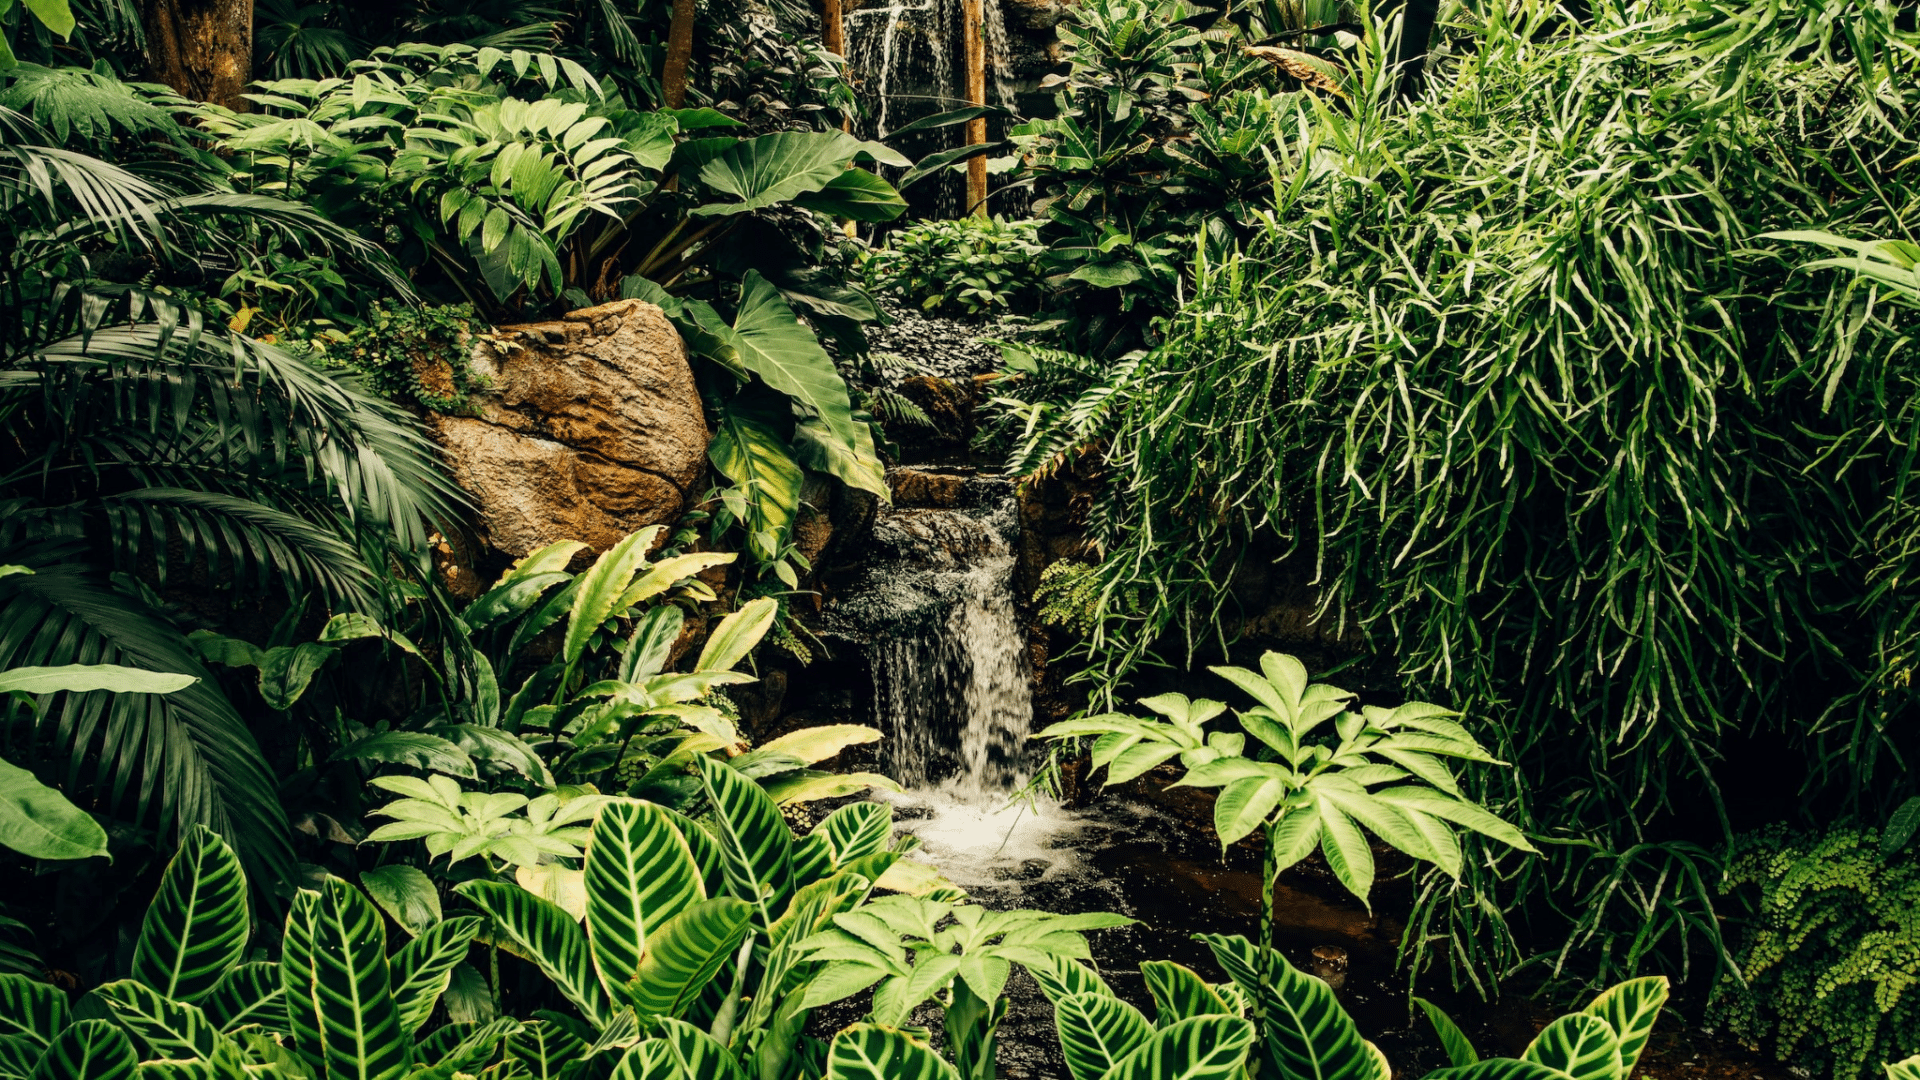 A variety of trees and other plants surrounding a waterfall.